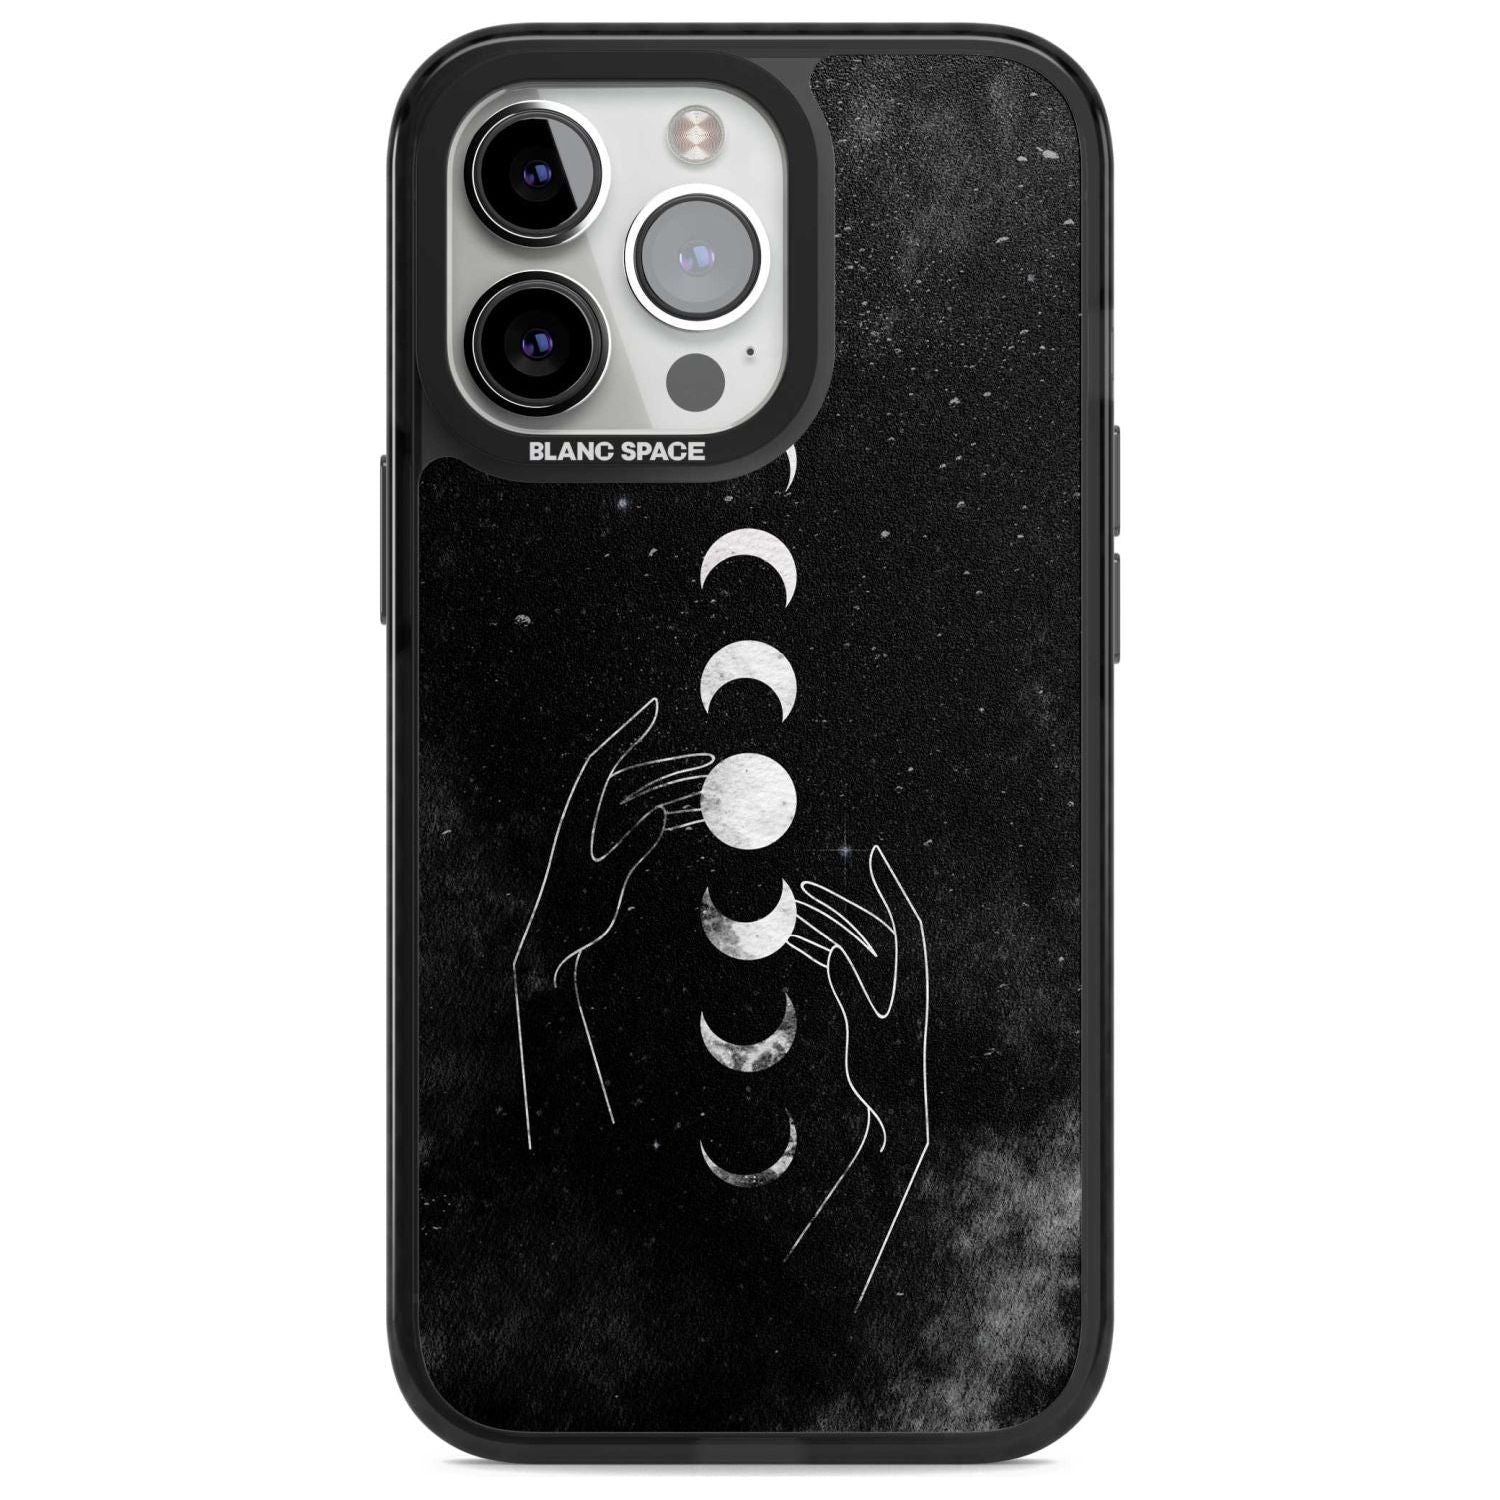 Moon Phases and Hands Phone Case iPhone 15 Pro Max / Magsafe Black Impact Case,iPhone 15 Pro / Magsafe Black Impact Case,iPhone 14 Pro Max / Magsafe Black Impact Case,iPhone 14 Pro / Magsafe Black Impact Case,iPhone 13 Pro / Magsafe Black Impact Case Blanc Space